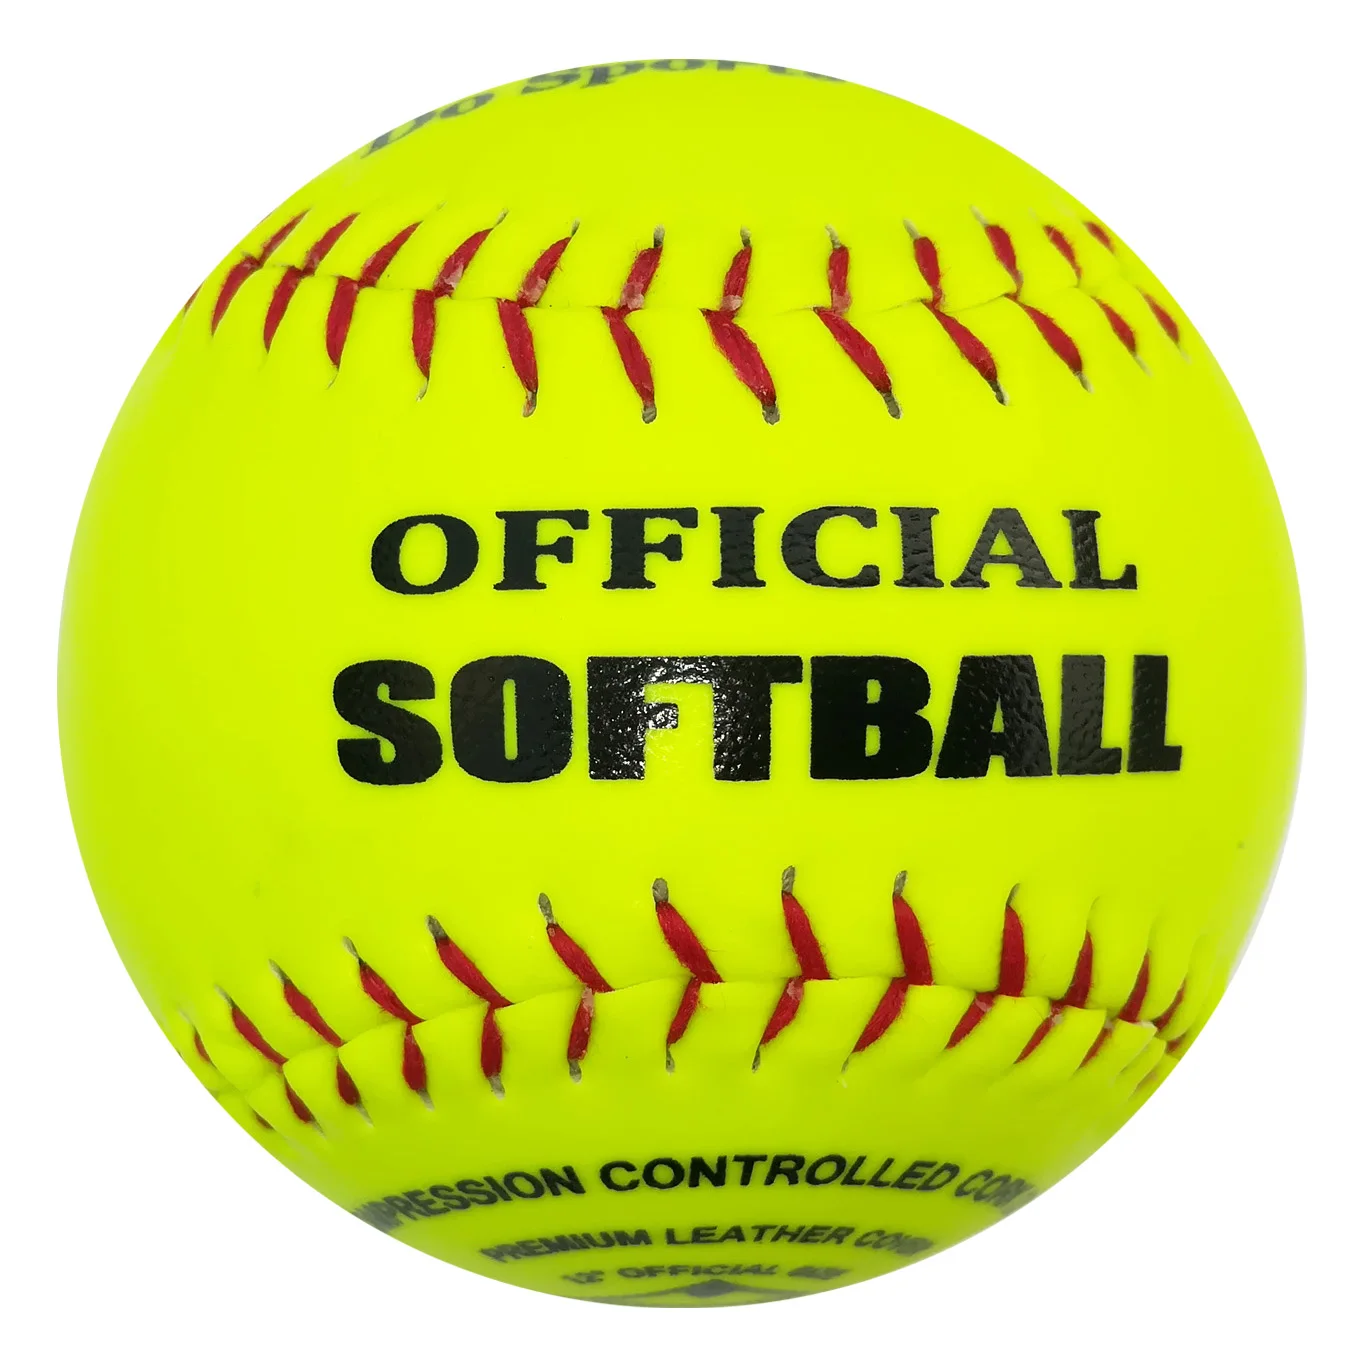 

custom logo official size and weight training quality synthetic leather+ cork core 12'' softball balls, Optical yellow